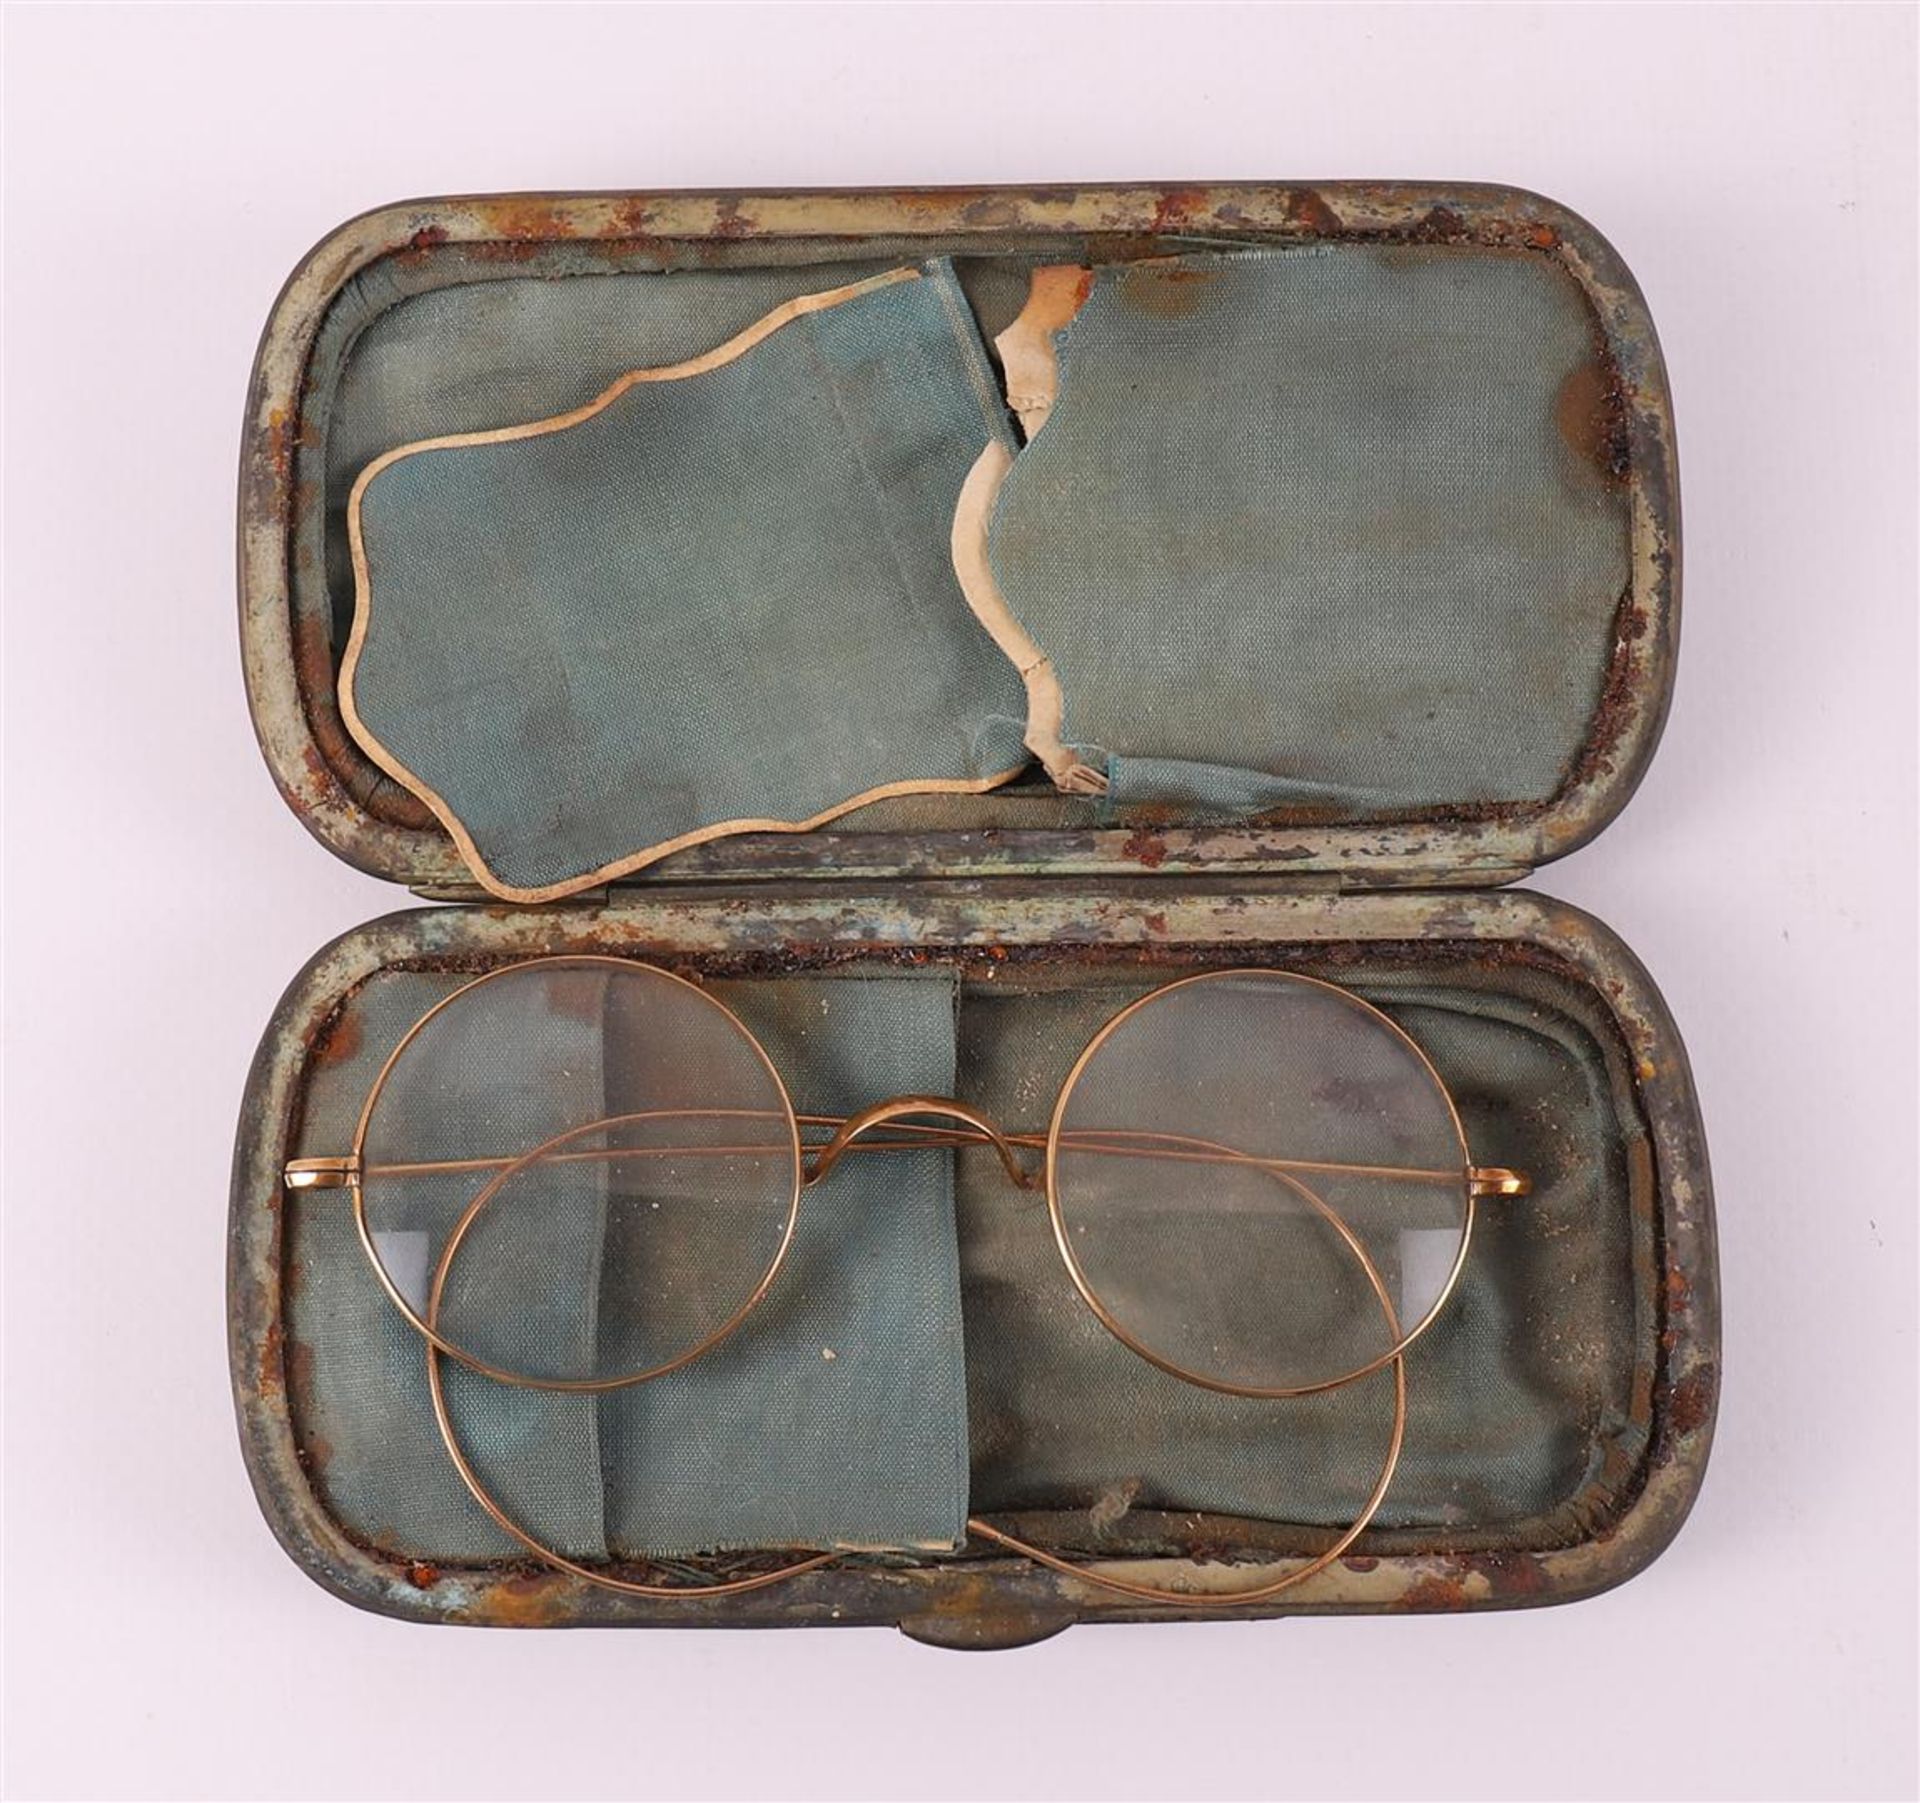 A tortoiseshell glasses case and cigar case, around 1900. - Image 2 of 3